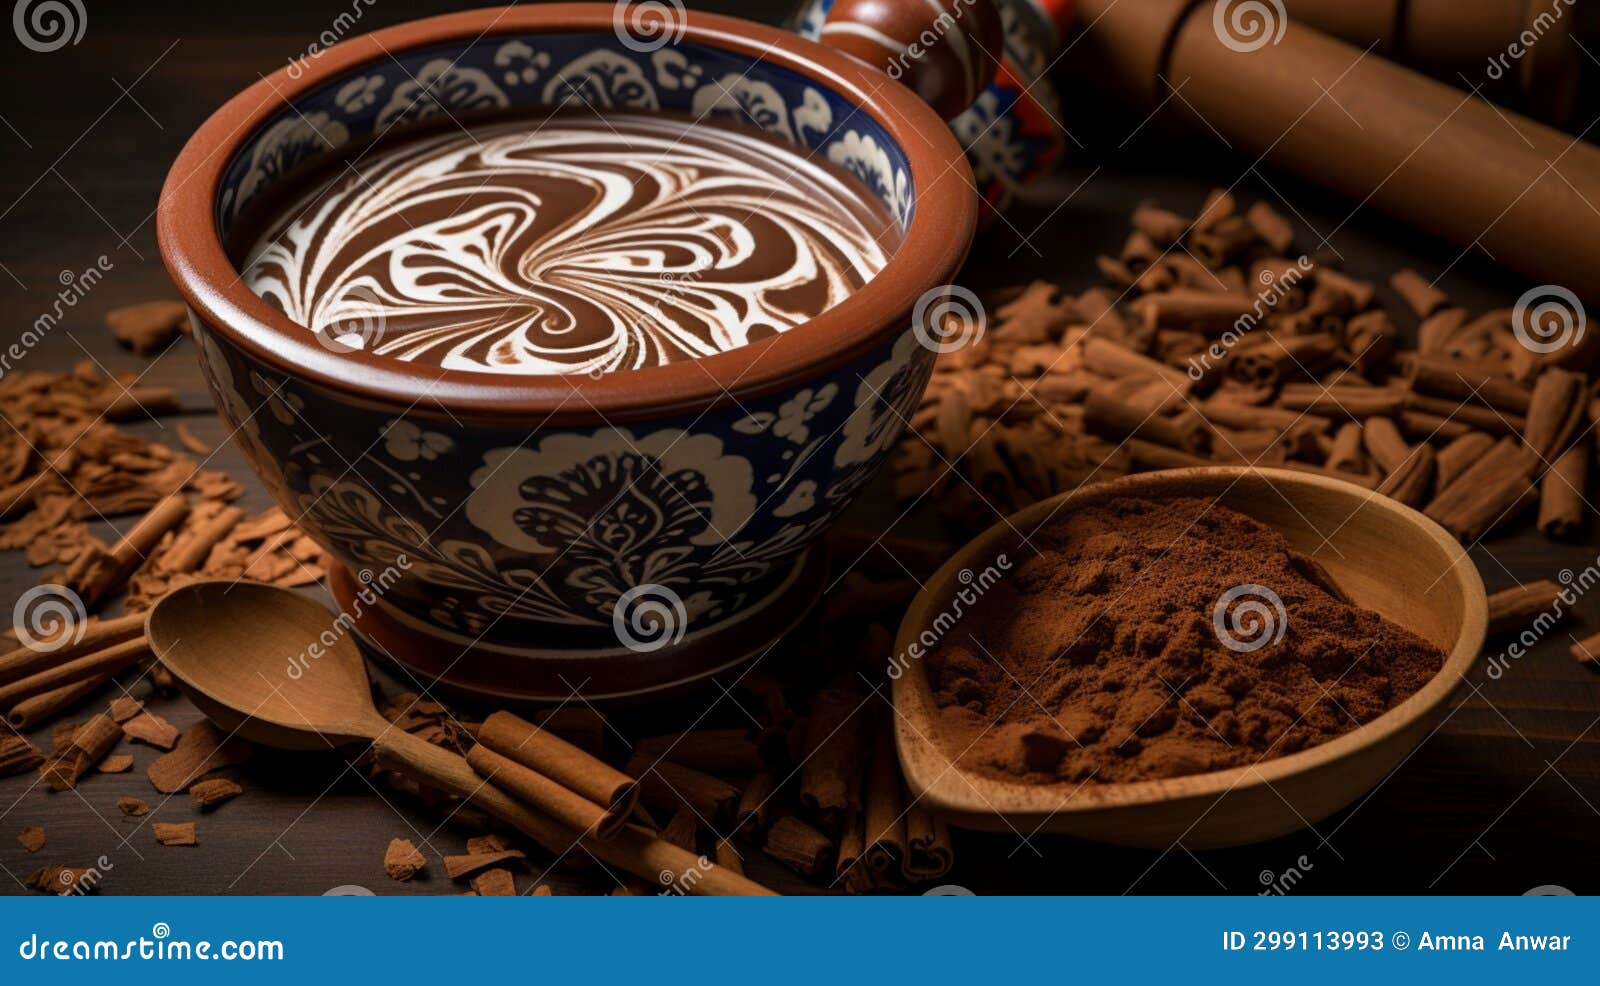 a full ultra hd photo capturing the intricate  of a mexican hot chocolate traditional molinillo, a wooden whisk used for